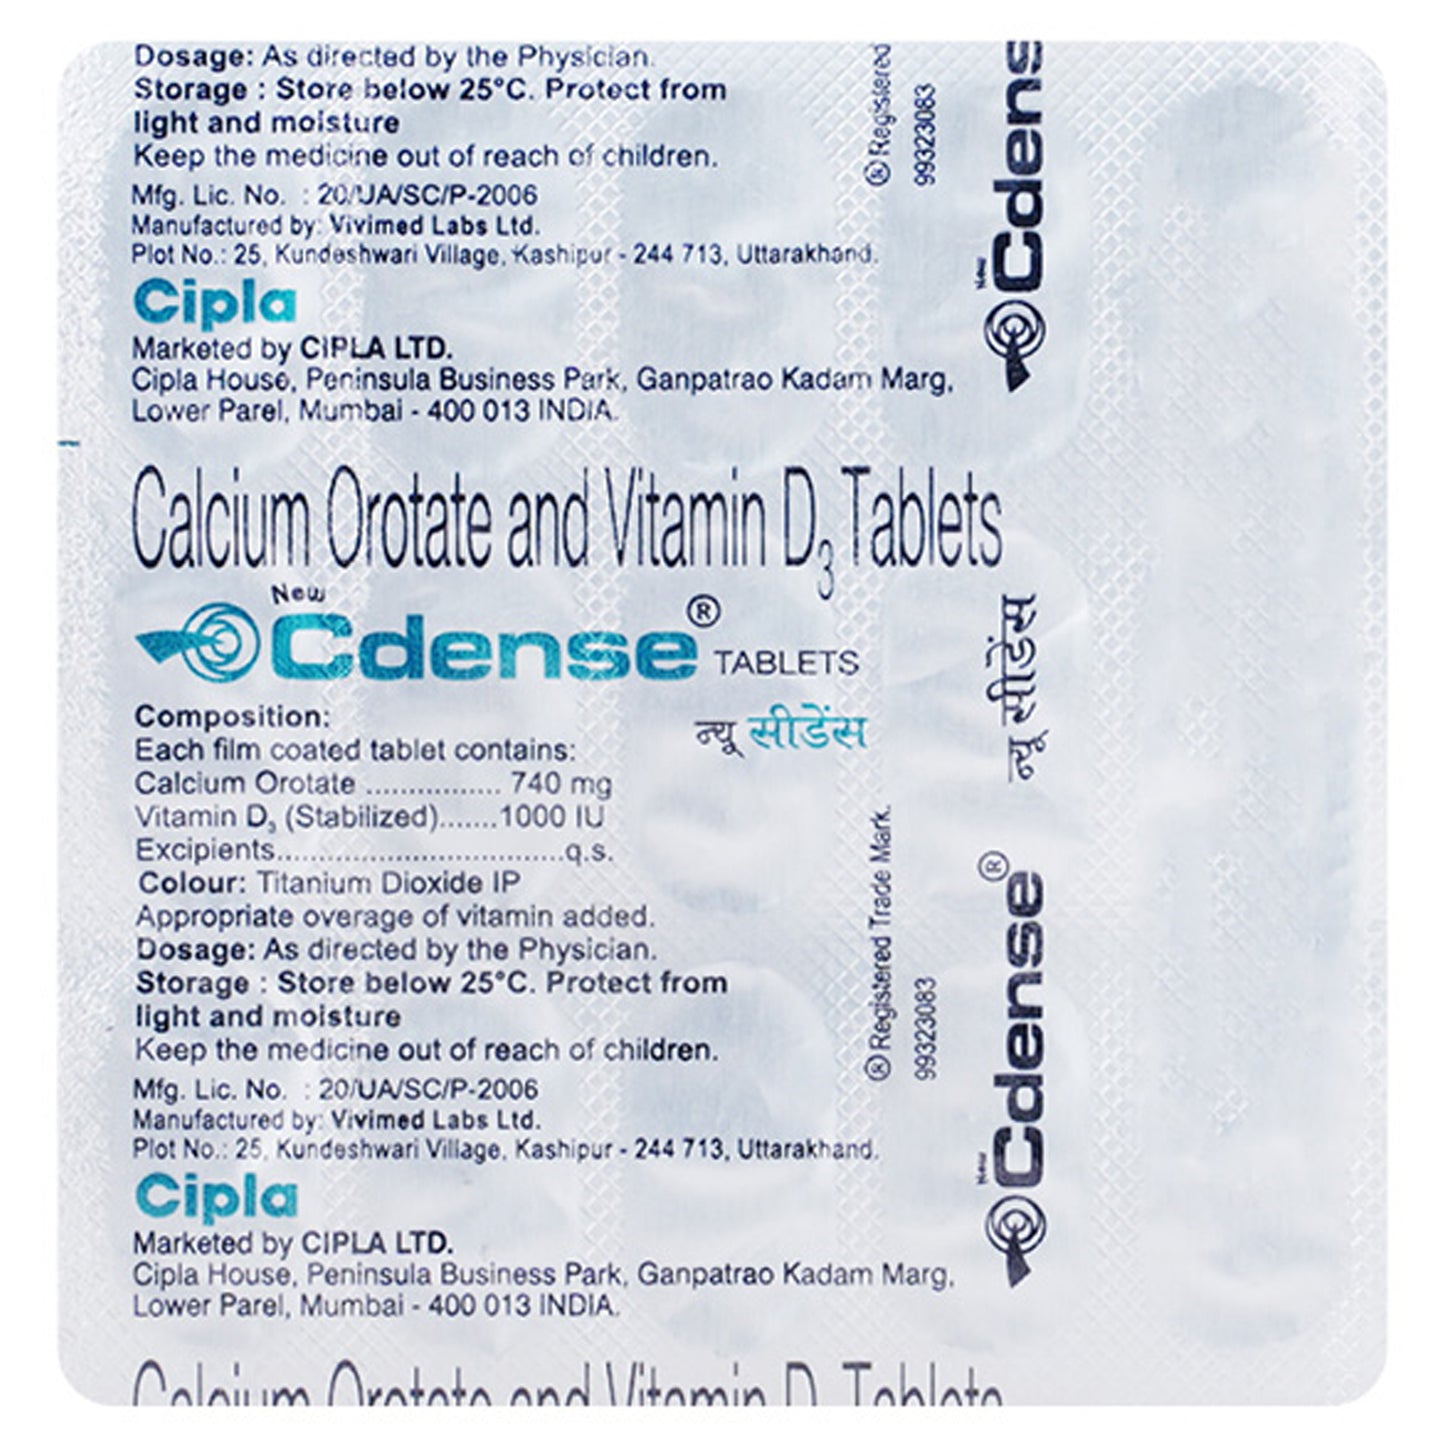 New Cdense, 15 Tablets